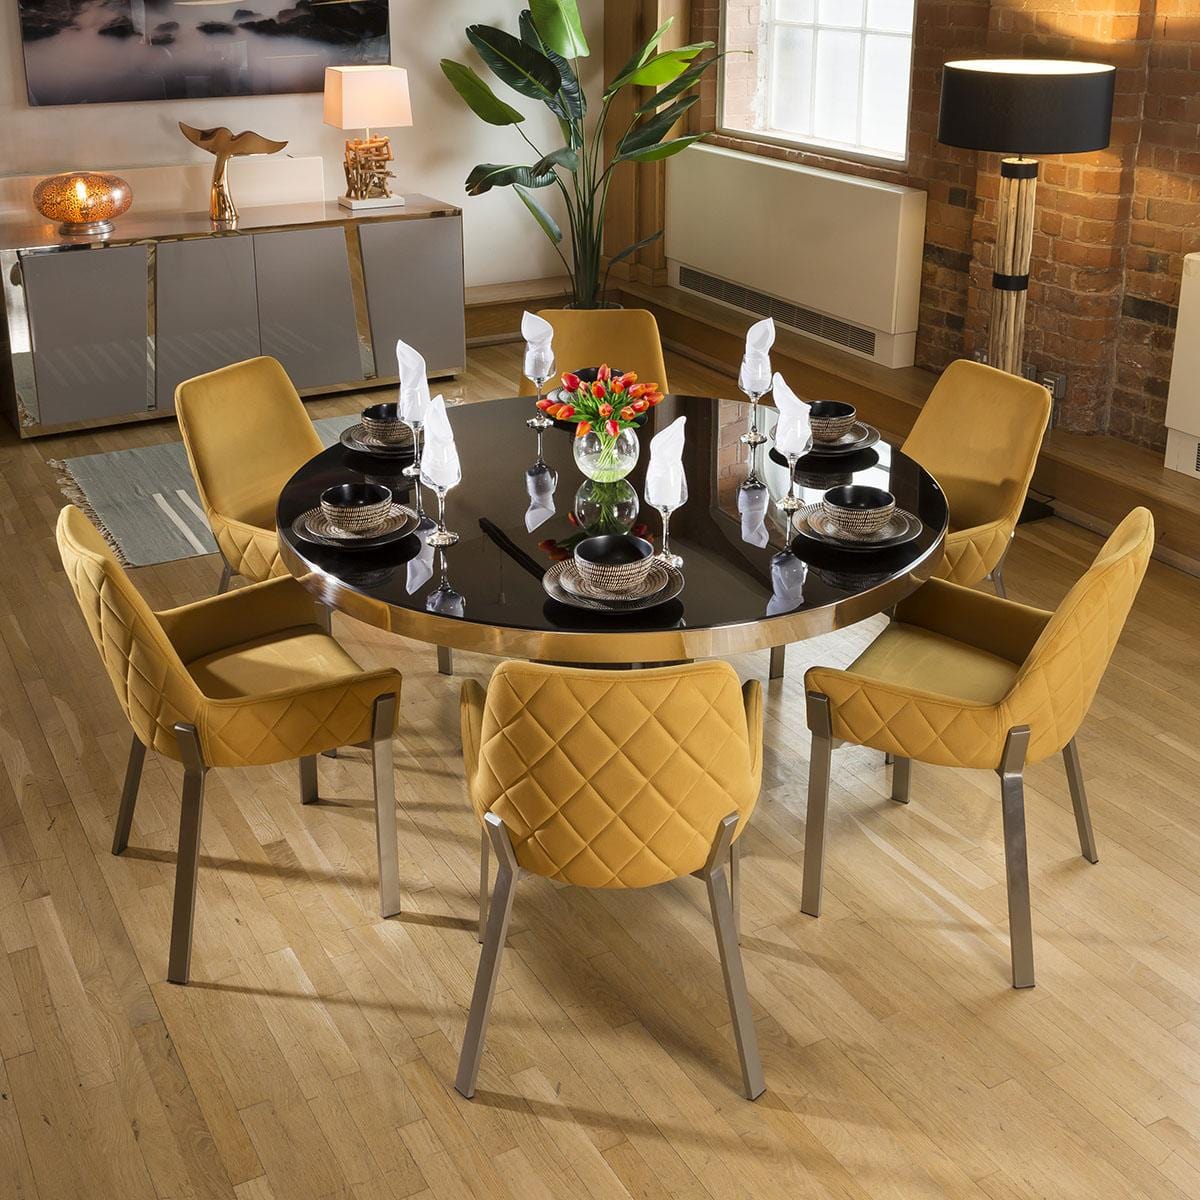 Quatropi Round Smoked Oak Dining Table Set 6 Mustard & Stainless Chairs